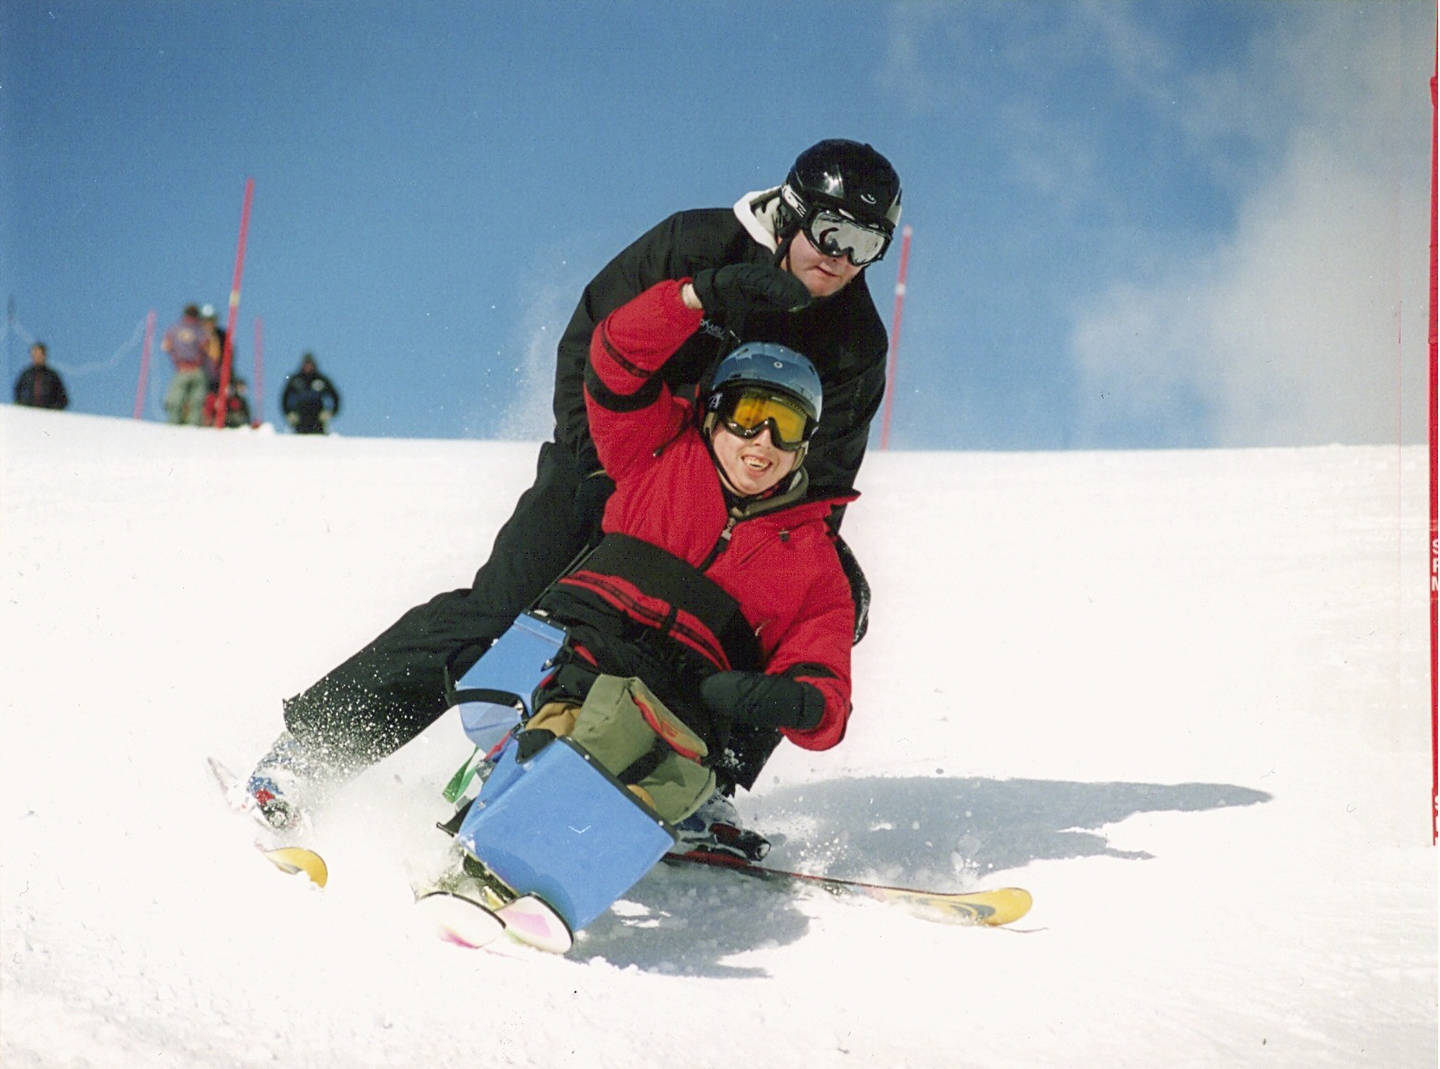 Disabled person skiing using sit-ski equipment